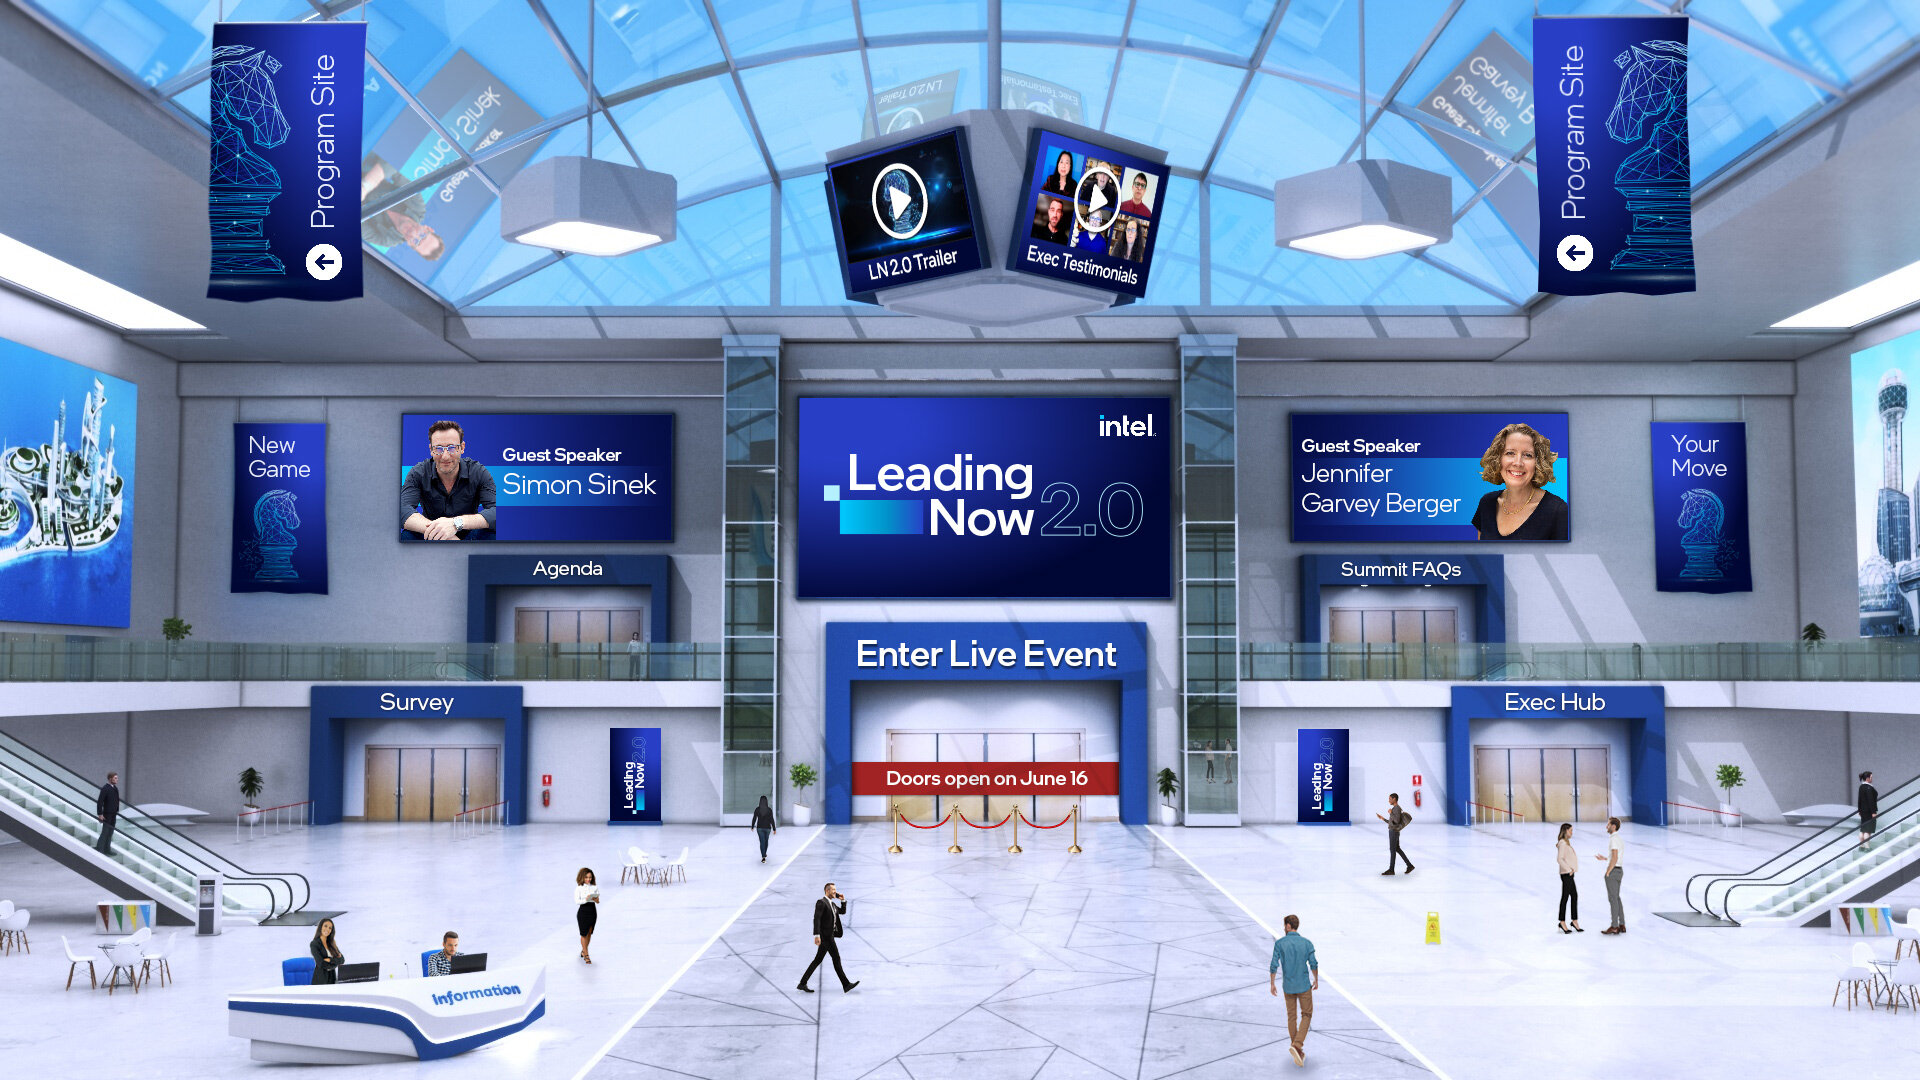 Virtual lobby for Leading Now 2.0 Summit